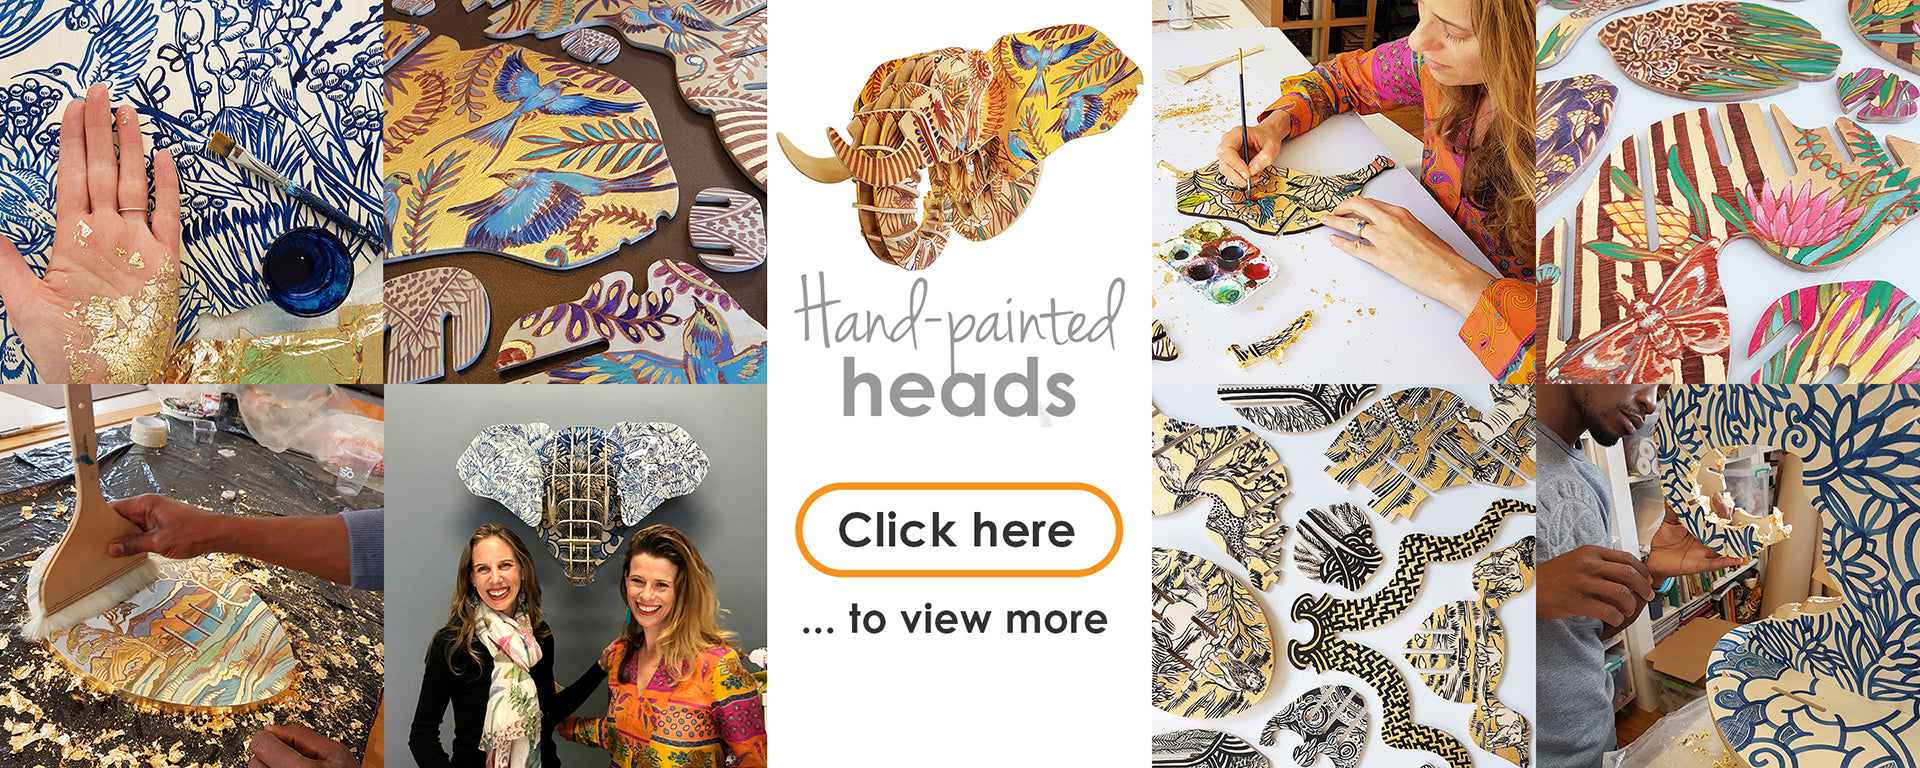 Hand painted heads by artist Sharon Boonzaier, finished in gold leaf